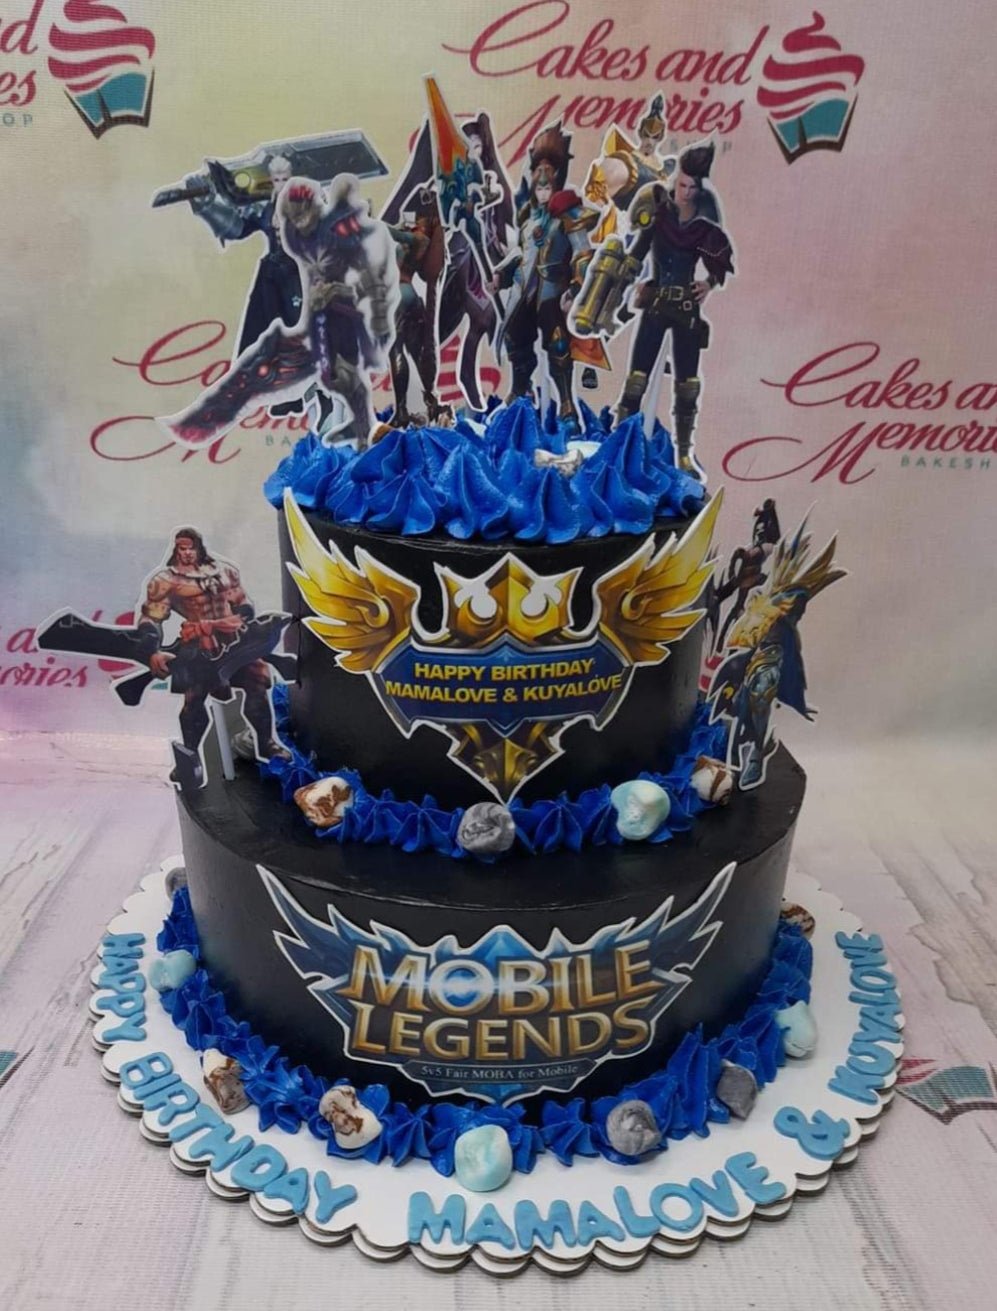 Mobile Legends Cake - 2206 – Cakes and Memories Bakeshop